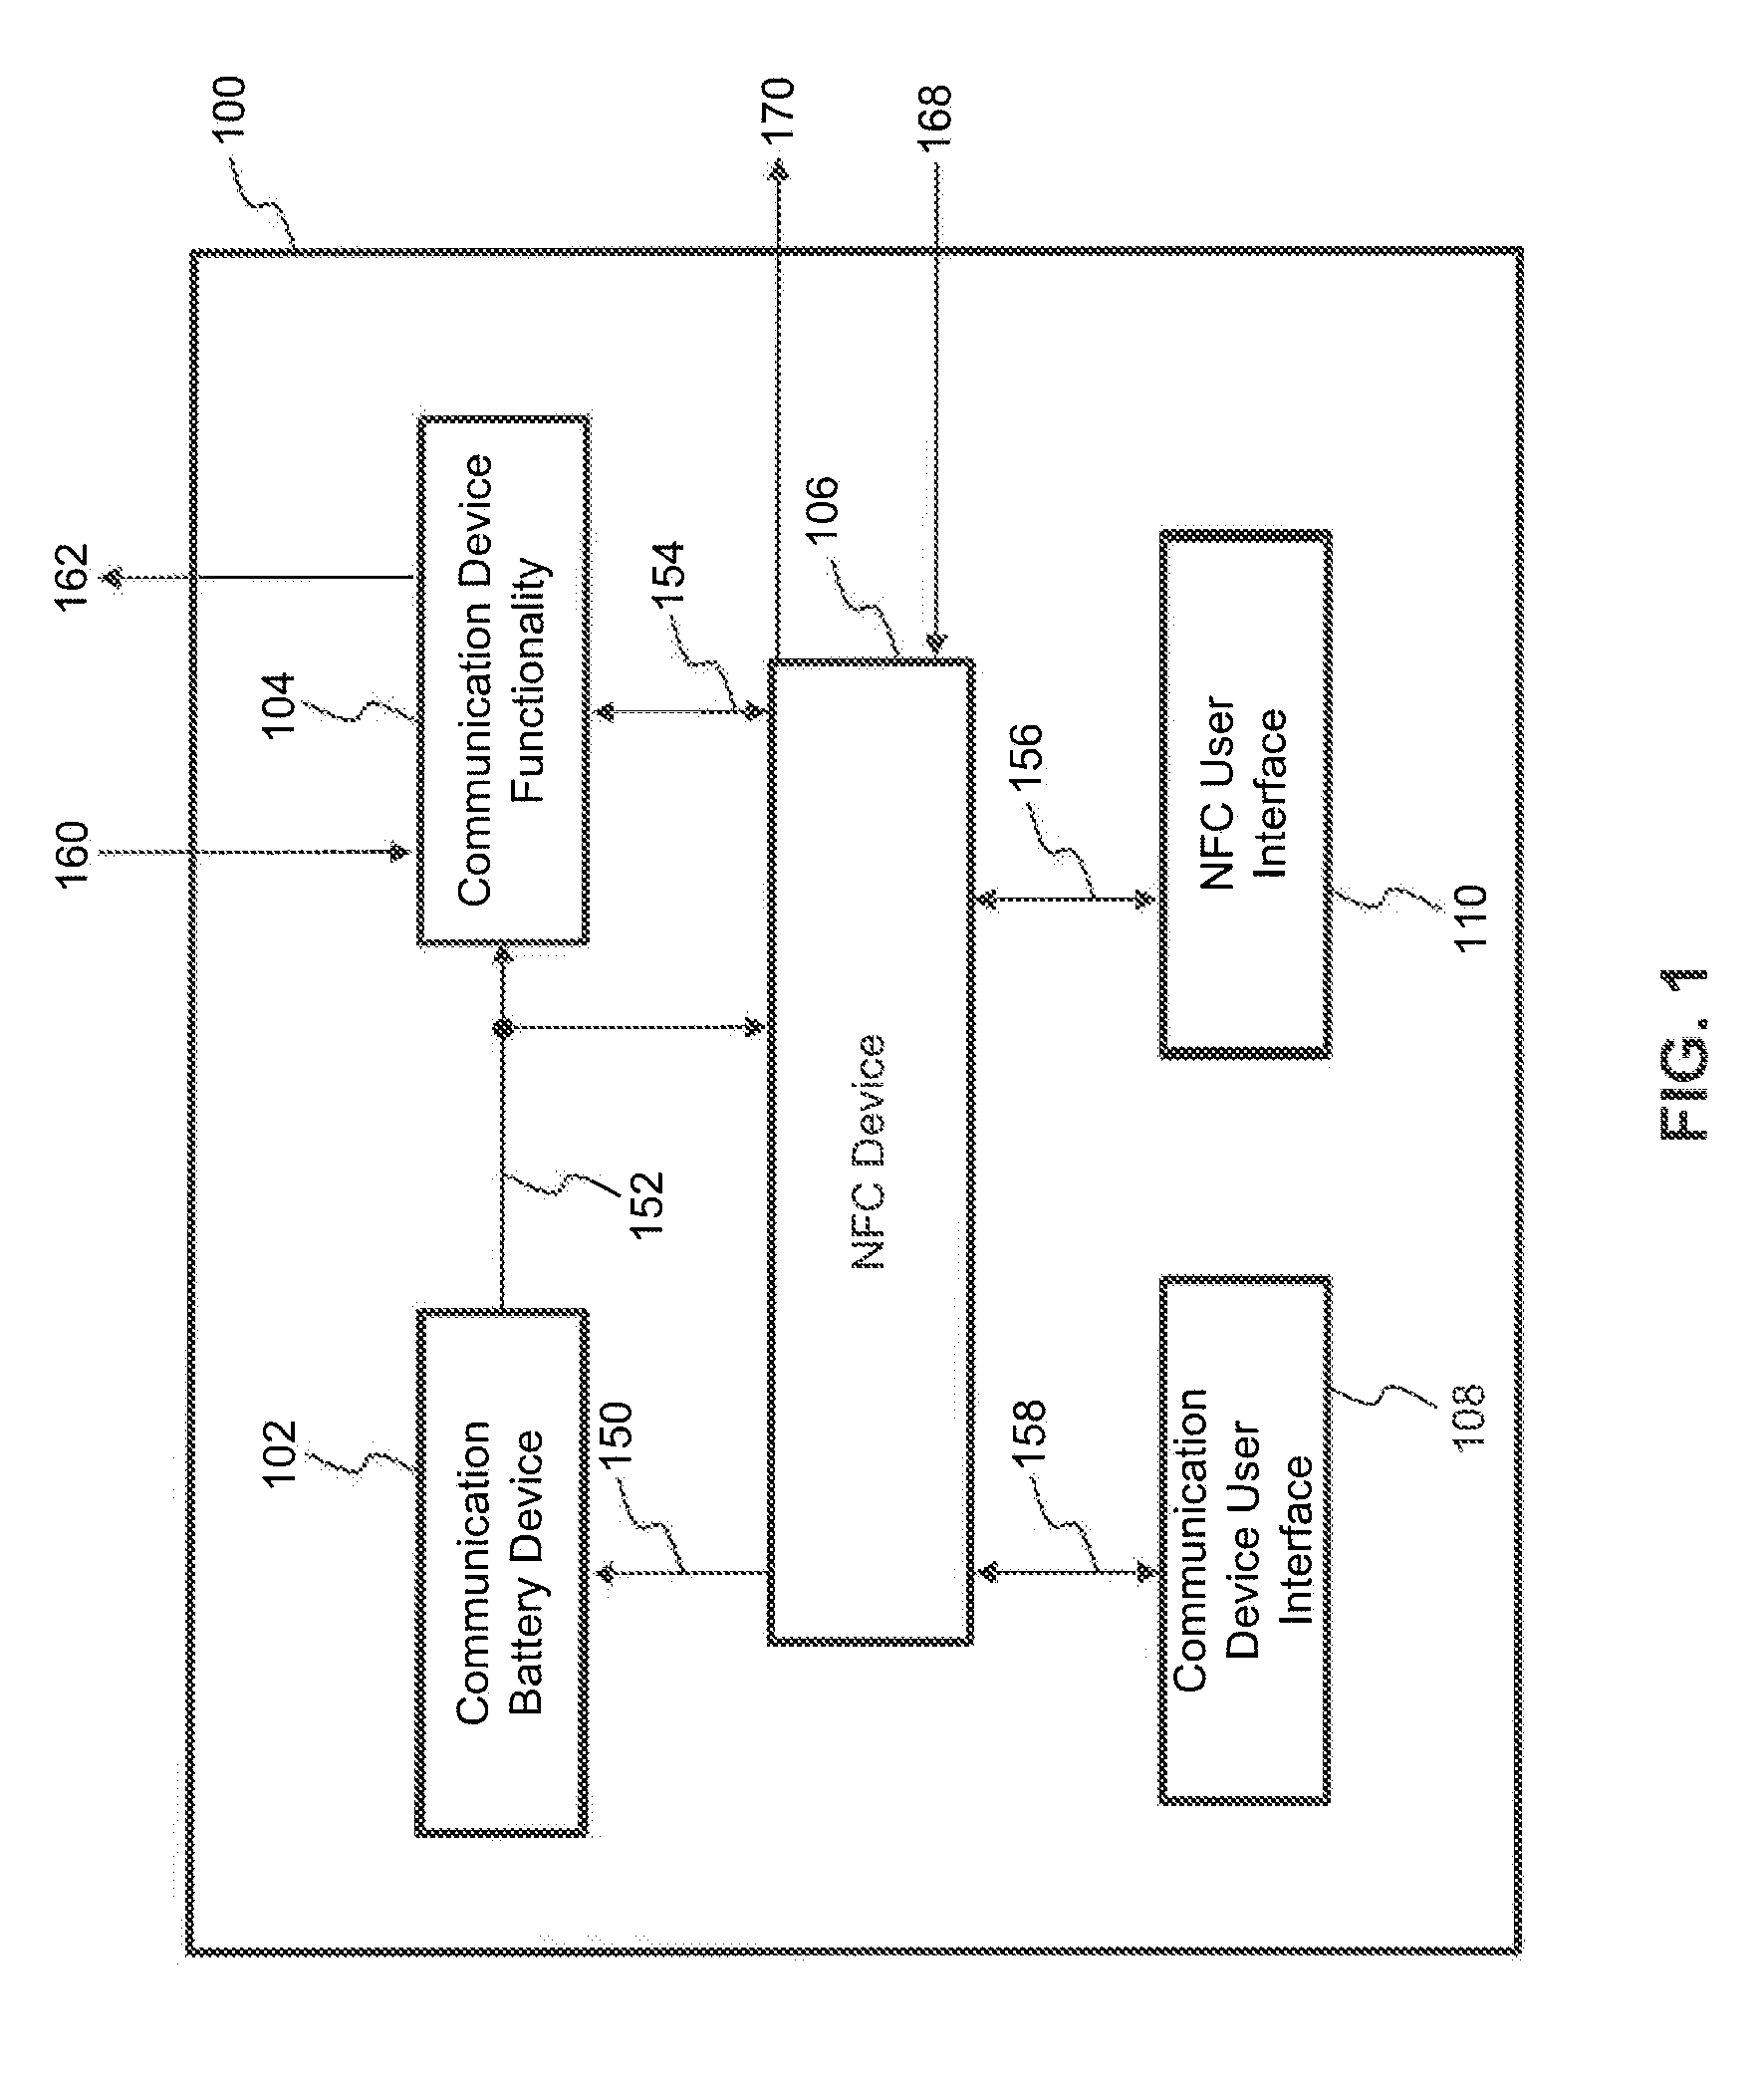 Communications Device for Intelligently Routing Information Among Multiple User Interfaces